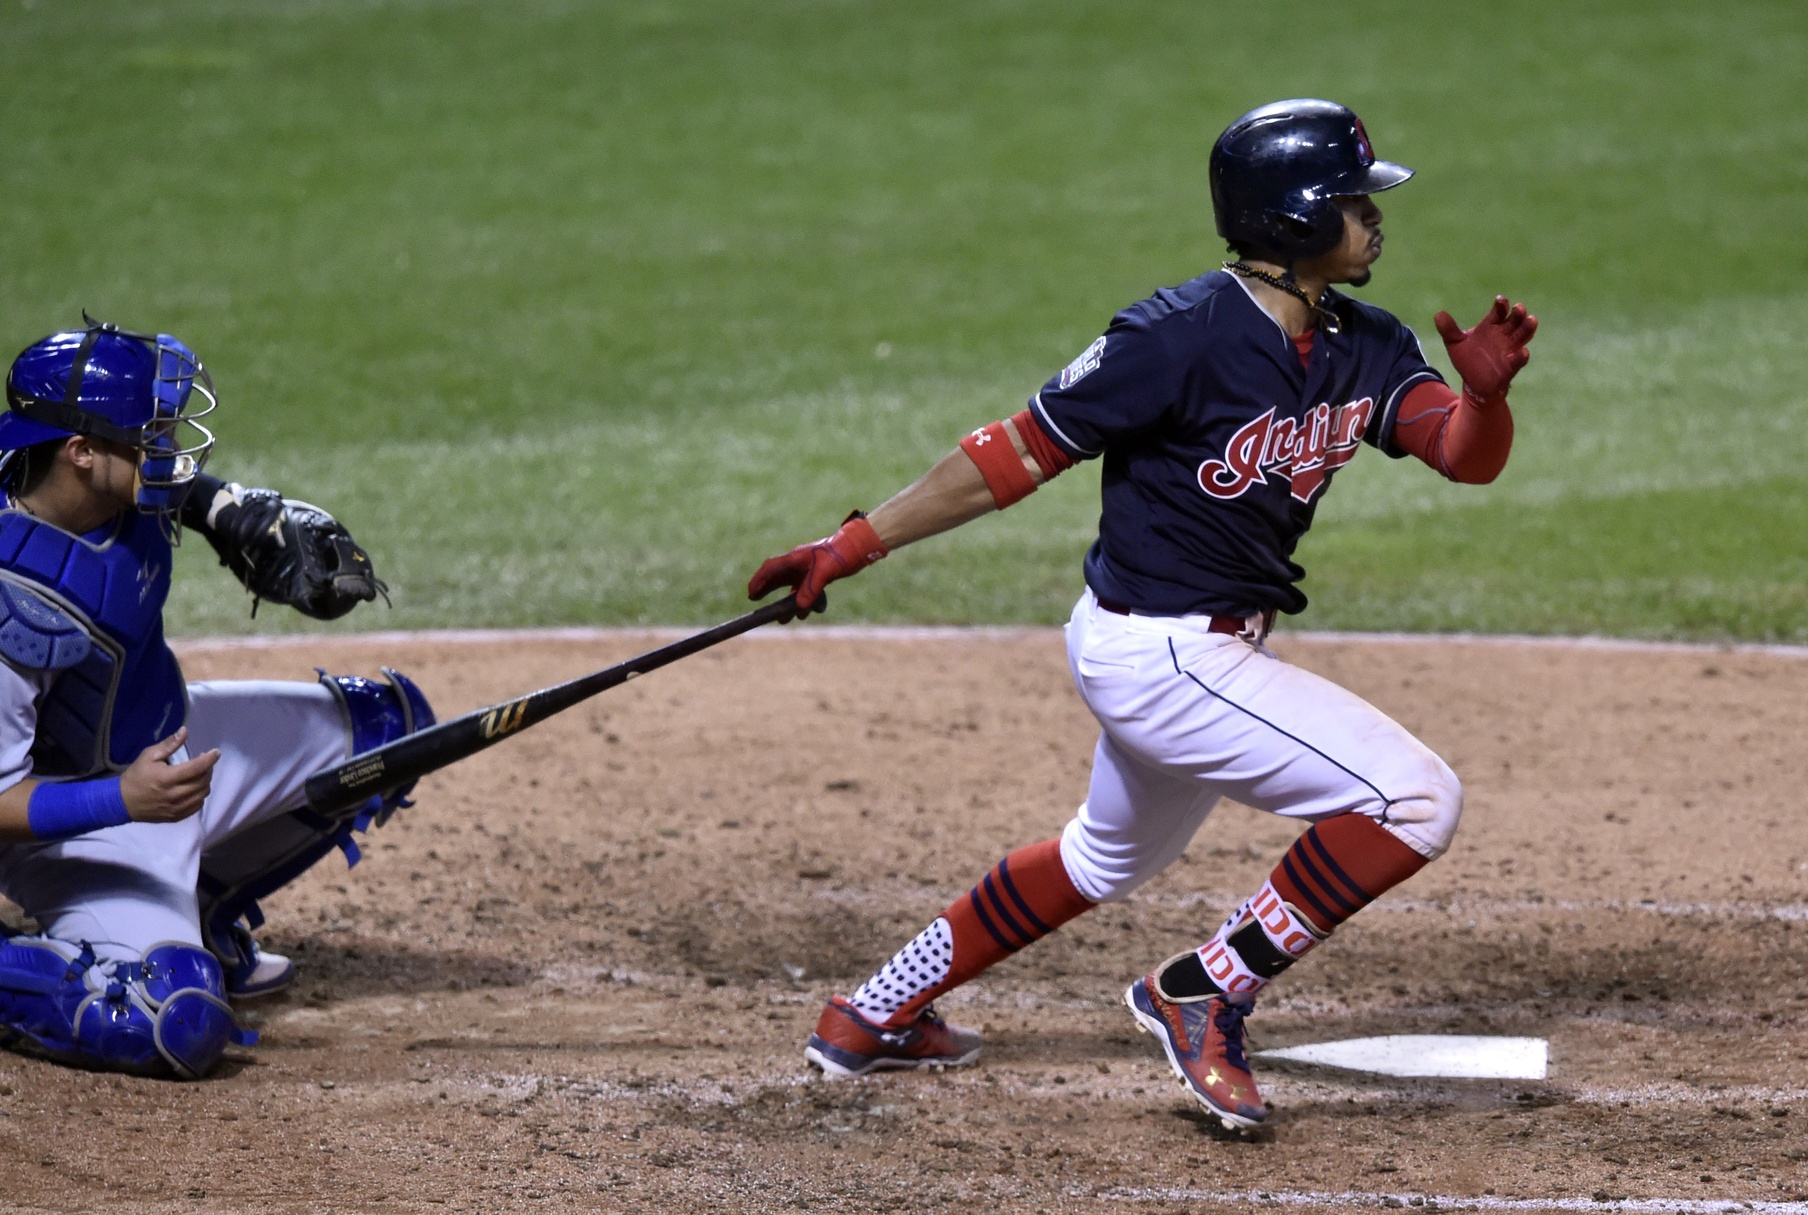 Oct 25, 2016; Cleveland, OH, USA; Cleveland Indians shortstop Francisco Lindor hits a double against the Chicago Cubs in the 7th inning in game one of the 2016 World Series at Progressive Field. Mandatory Credit: David Richard-USA TODAY Sports